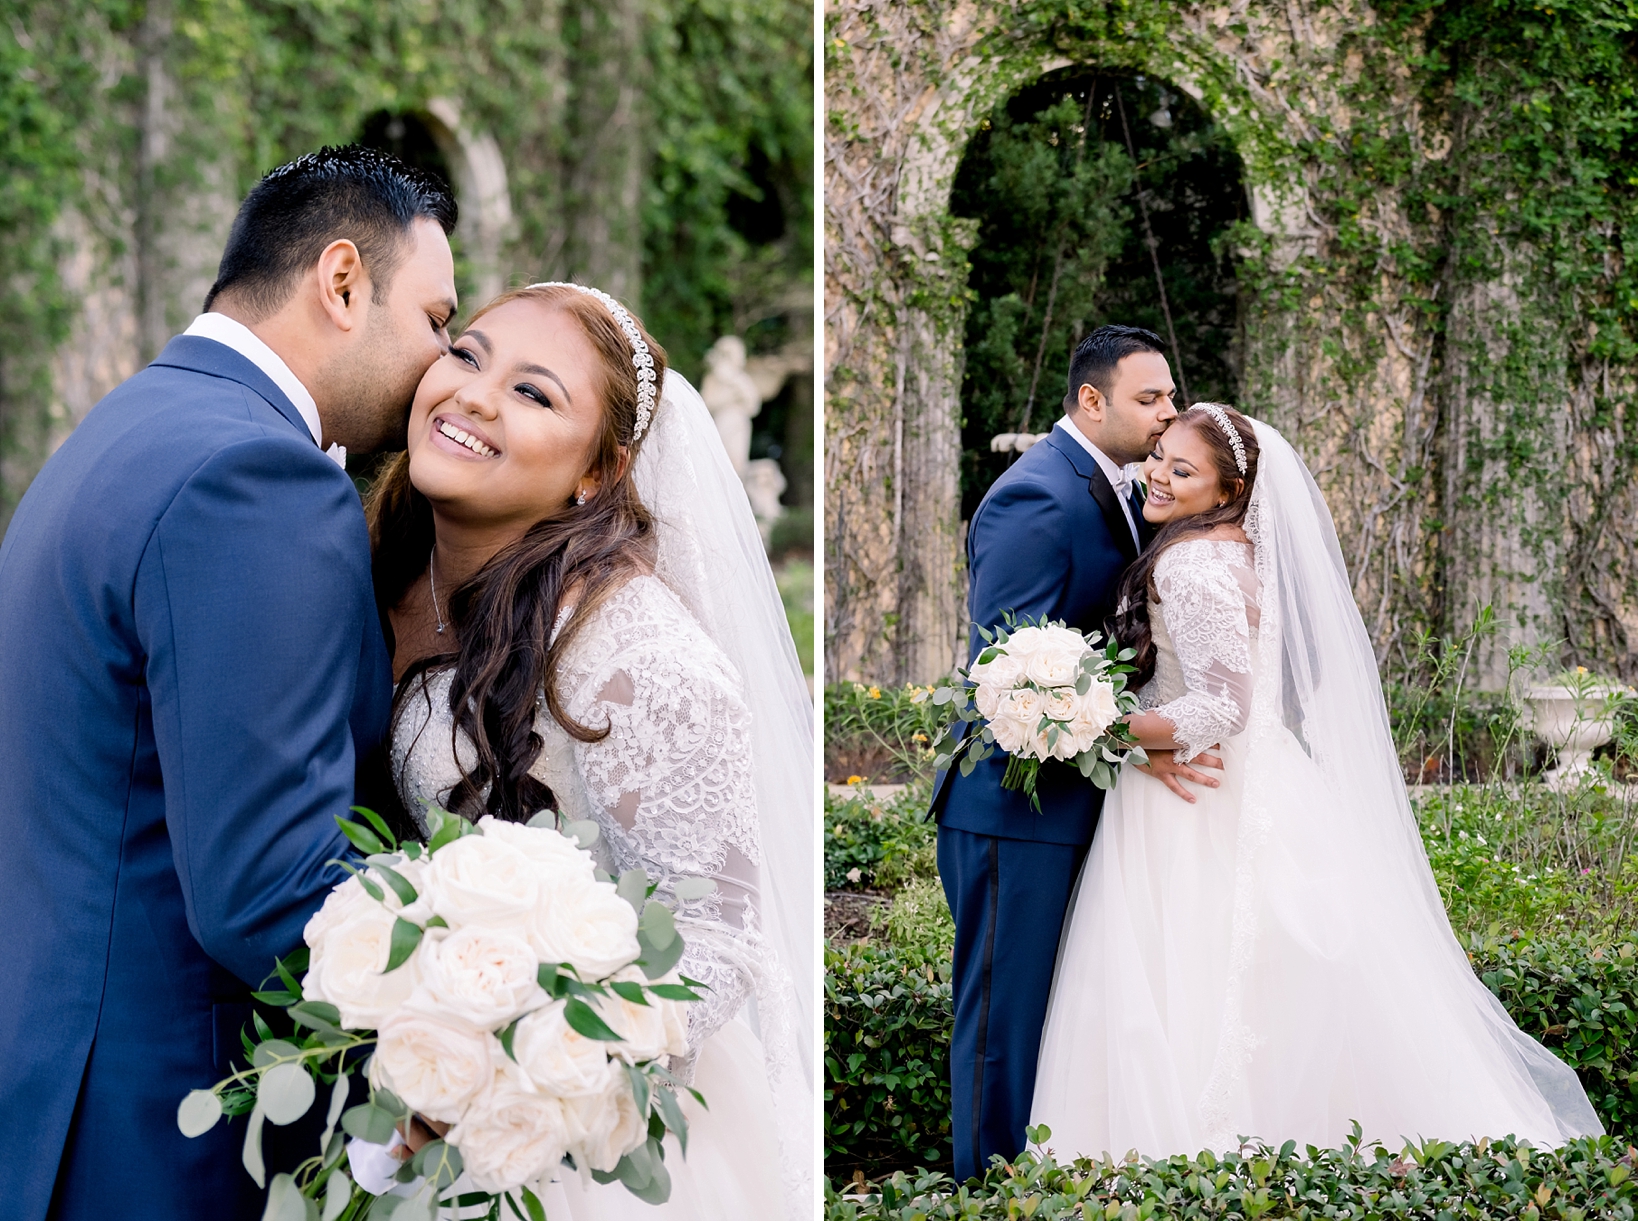 The Bride and Groom share an embrace in the gardens of the Kapok Tree 